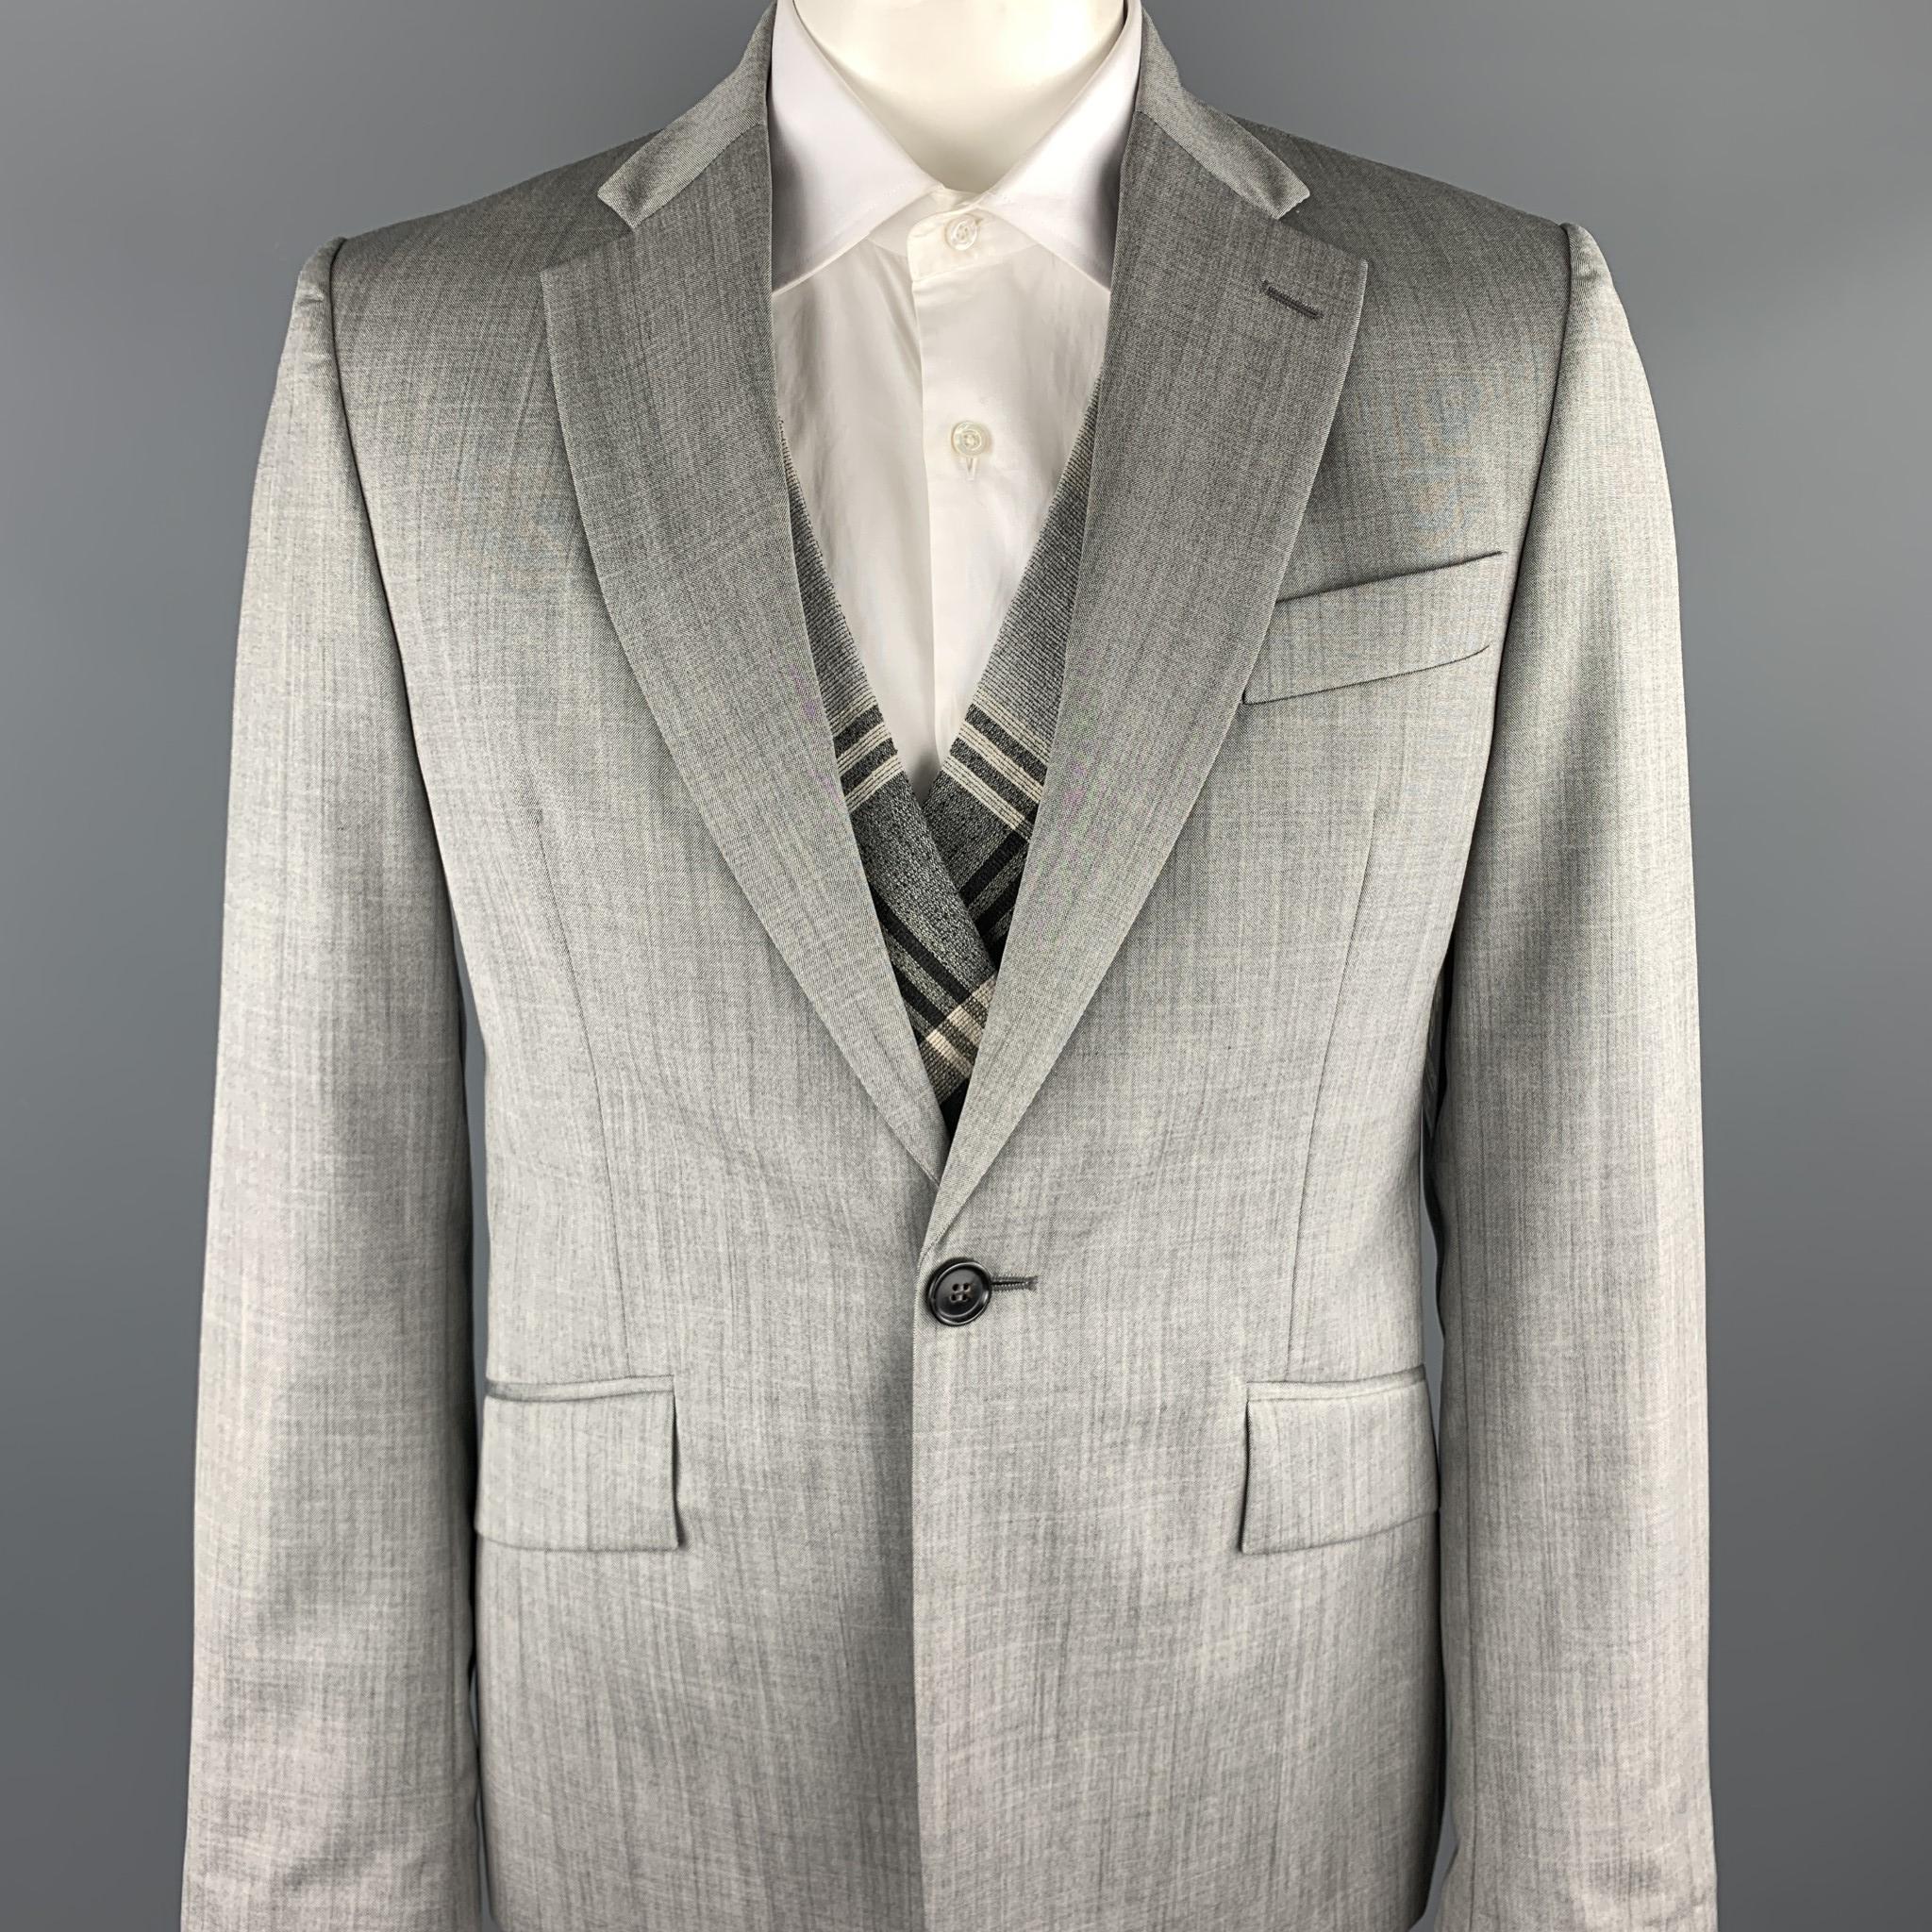 VIVIENNE WESTWOOD MAN sport coat comes in a gray wool featuring a regular slim fit, notch lapel, plaid simulated vest layer, flap pockets, and a single button closure. Made in Italy.

Excellent Pre-Owned Condition.
Marked: IT